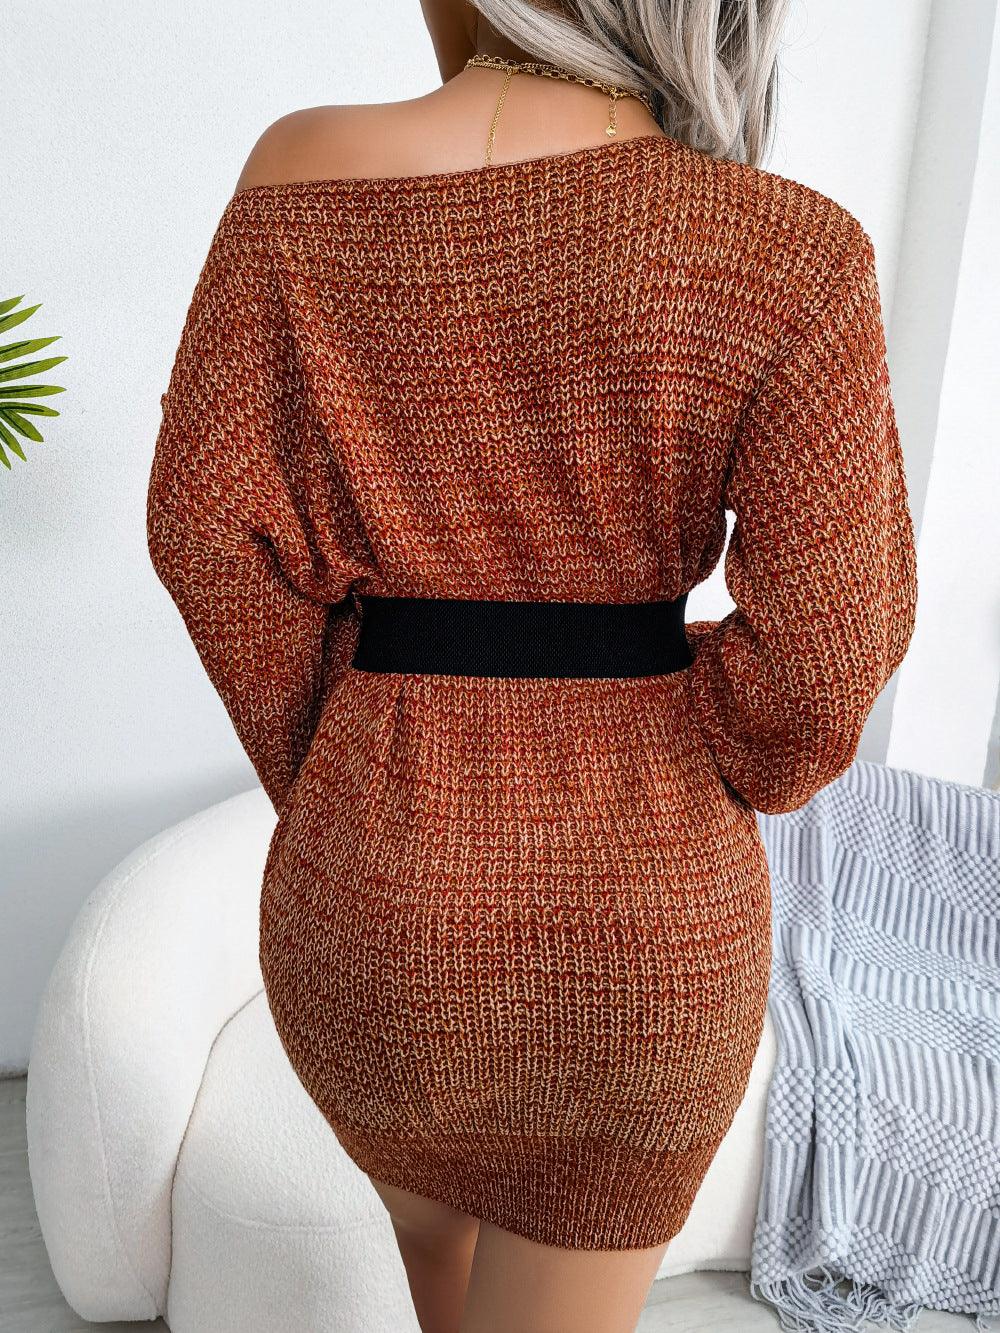 Autumn Winter Casual Knitted Sweater Dress - ForVanity dress, Sweater Dress 